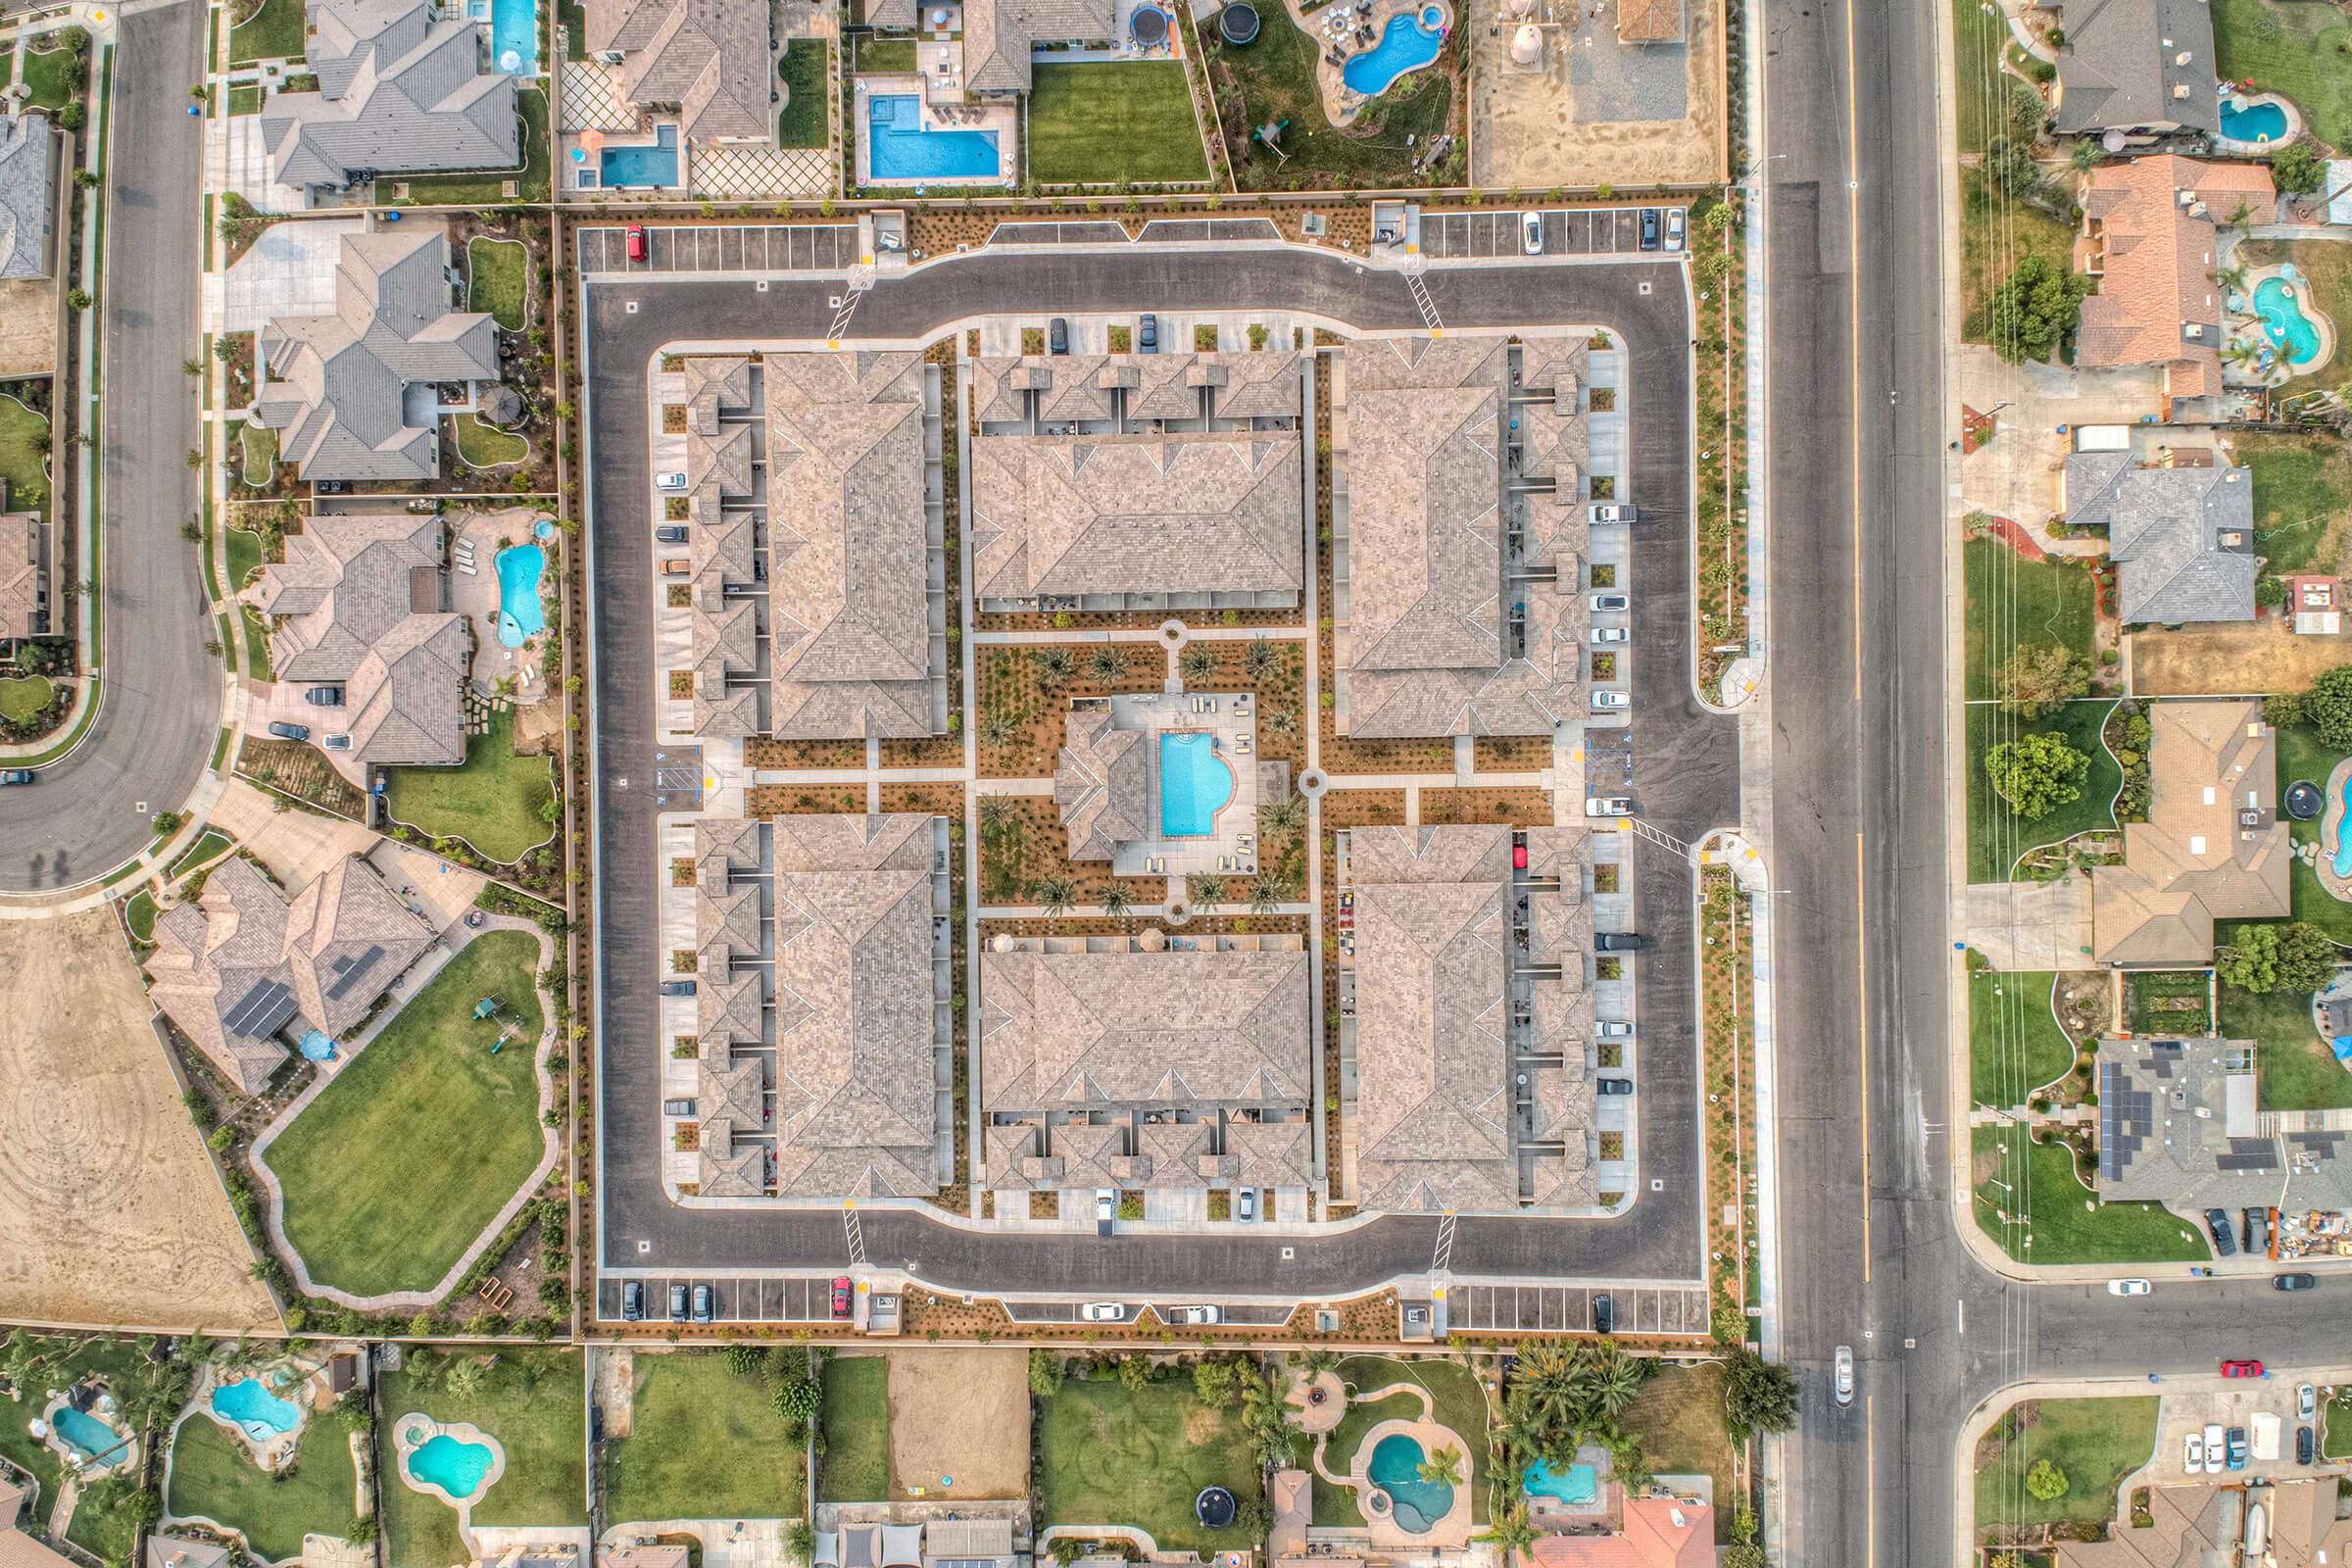 Masterpiece Parke apartment complex from above